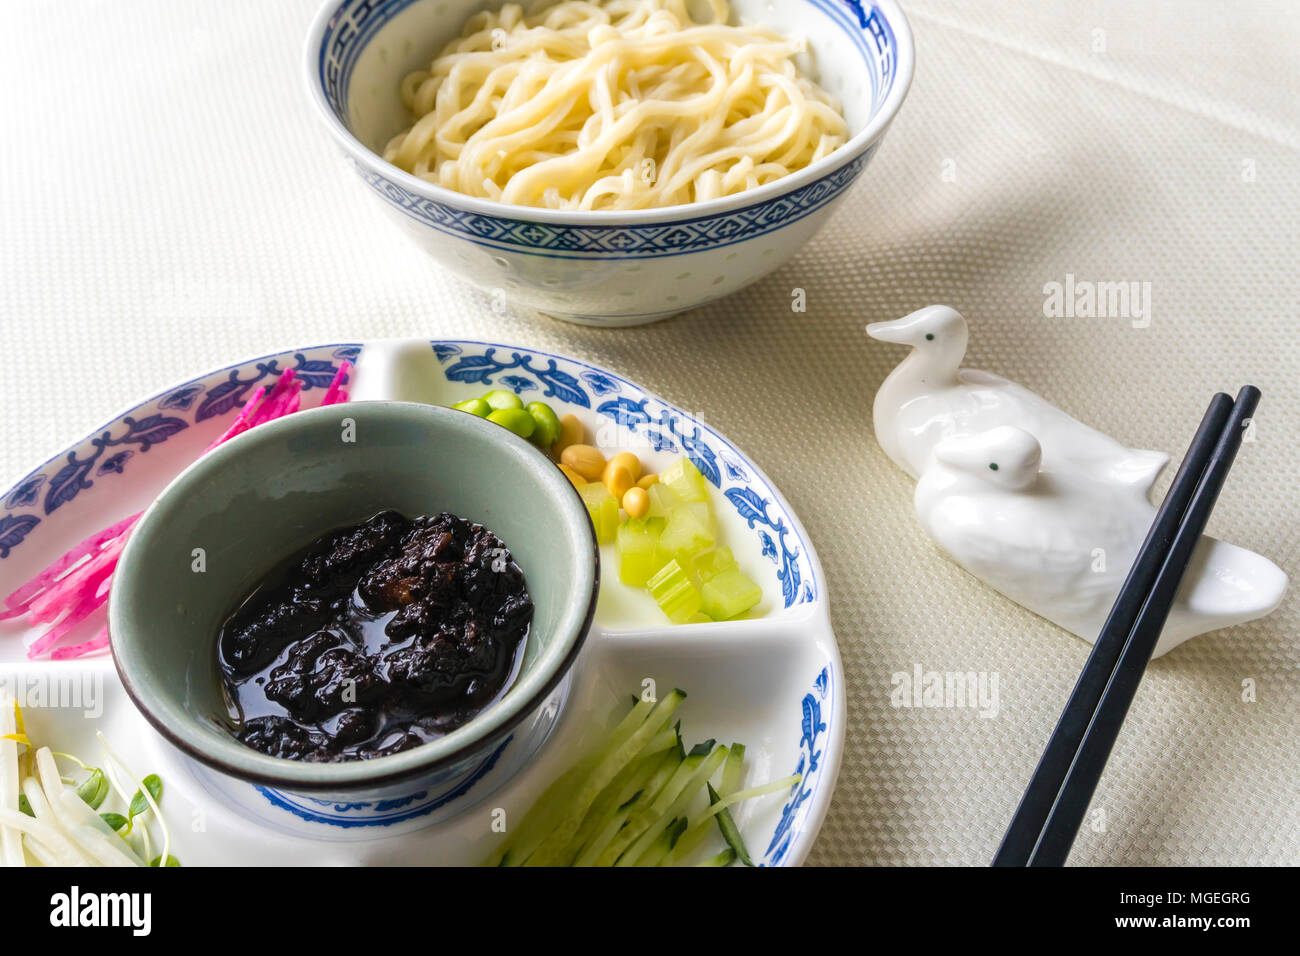 Beijing noodle with soybean paste Stock Photo